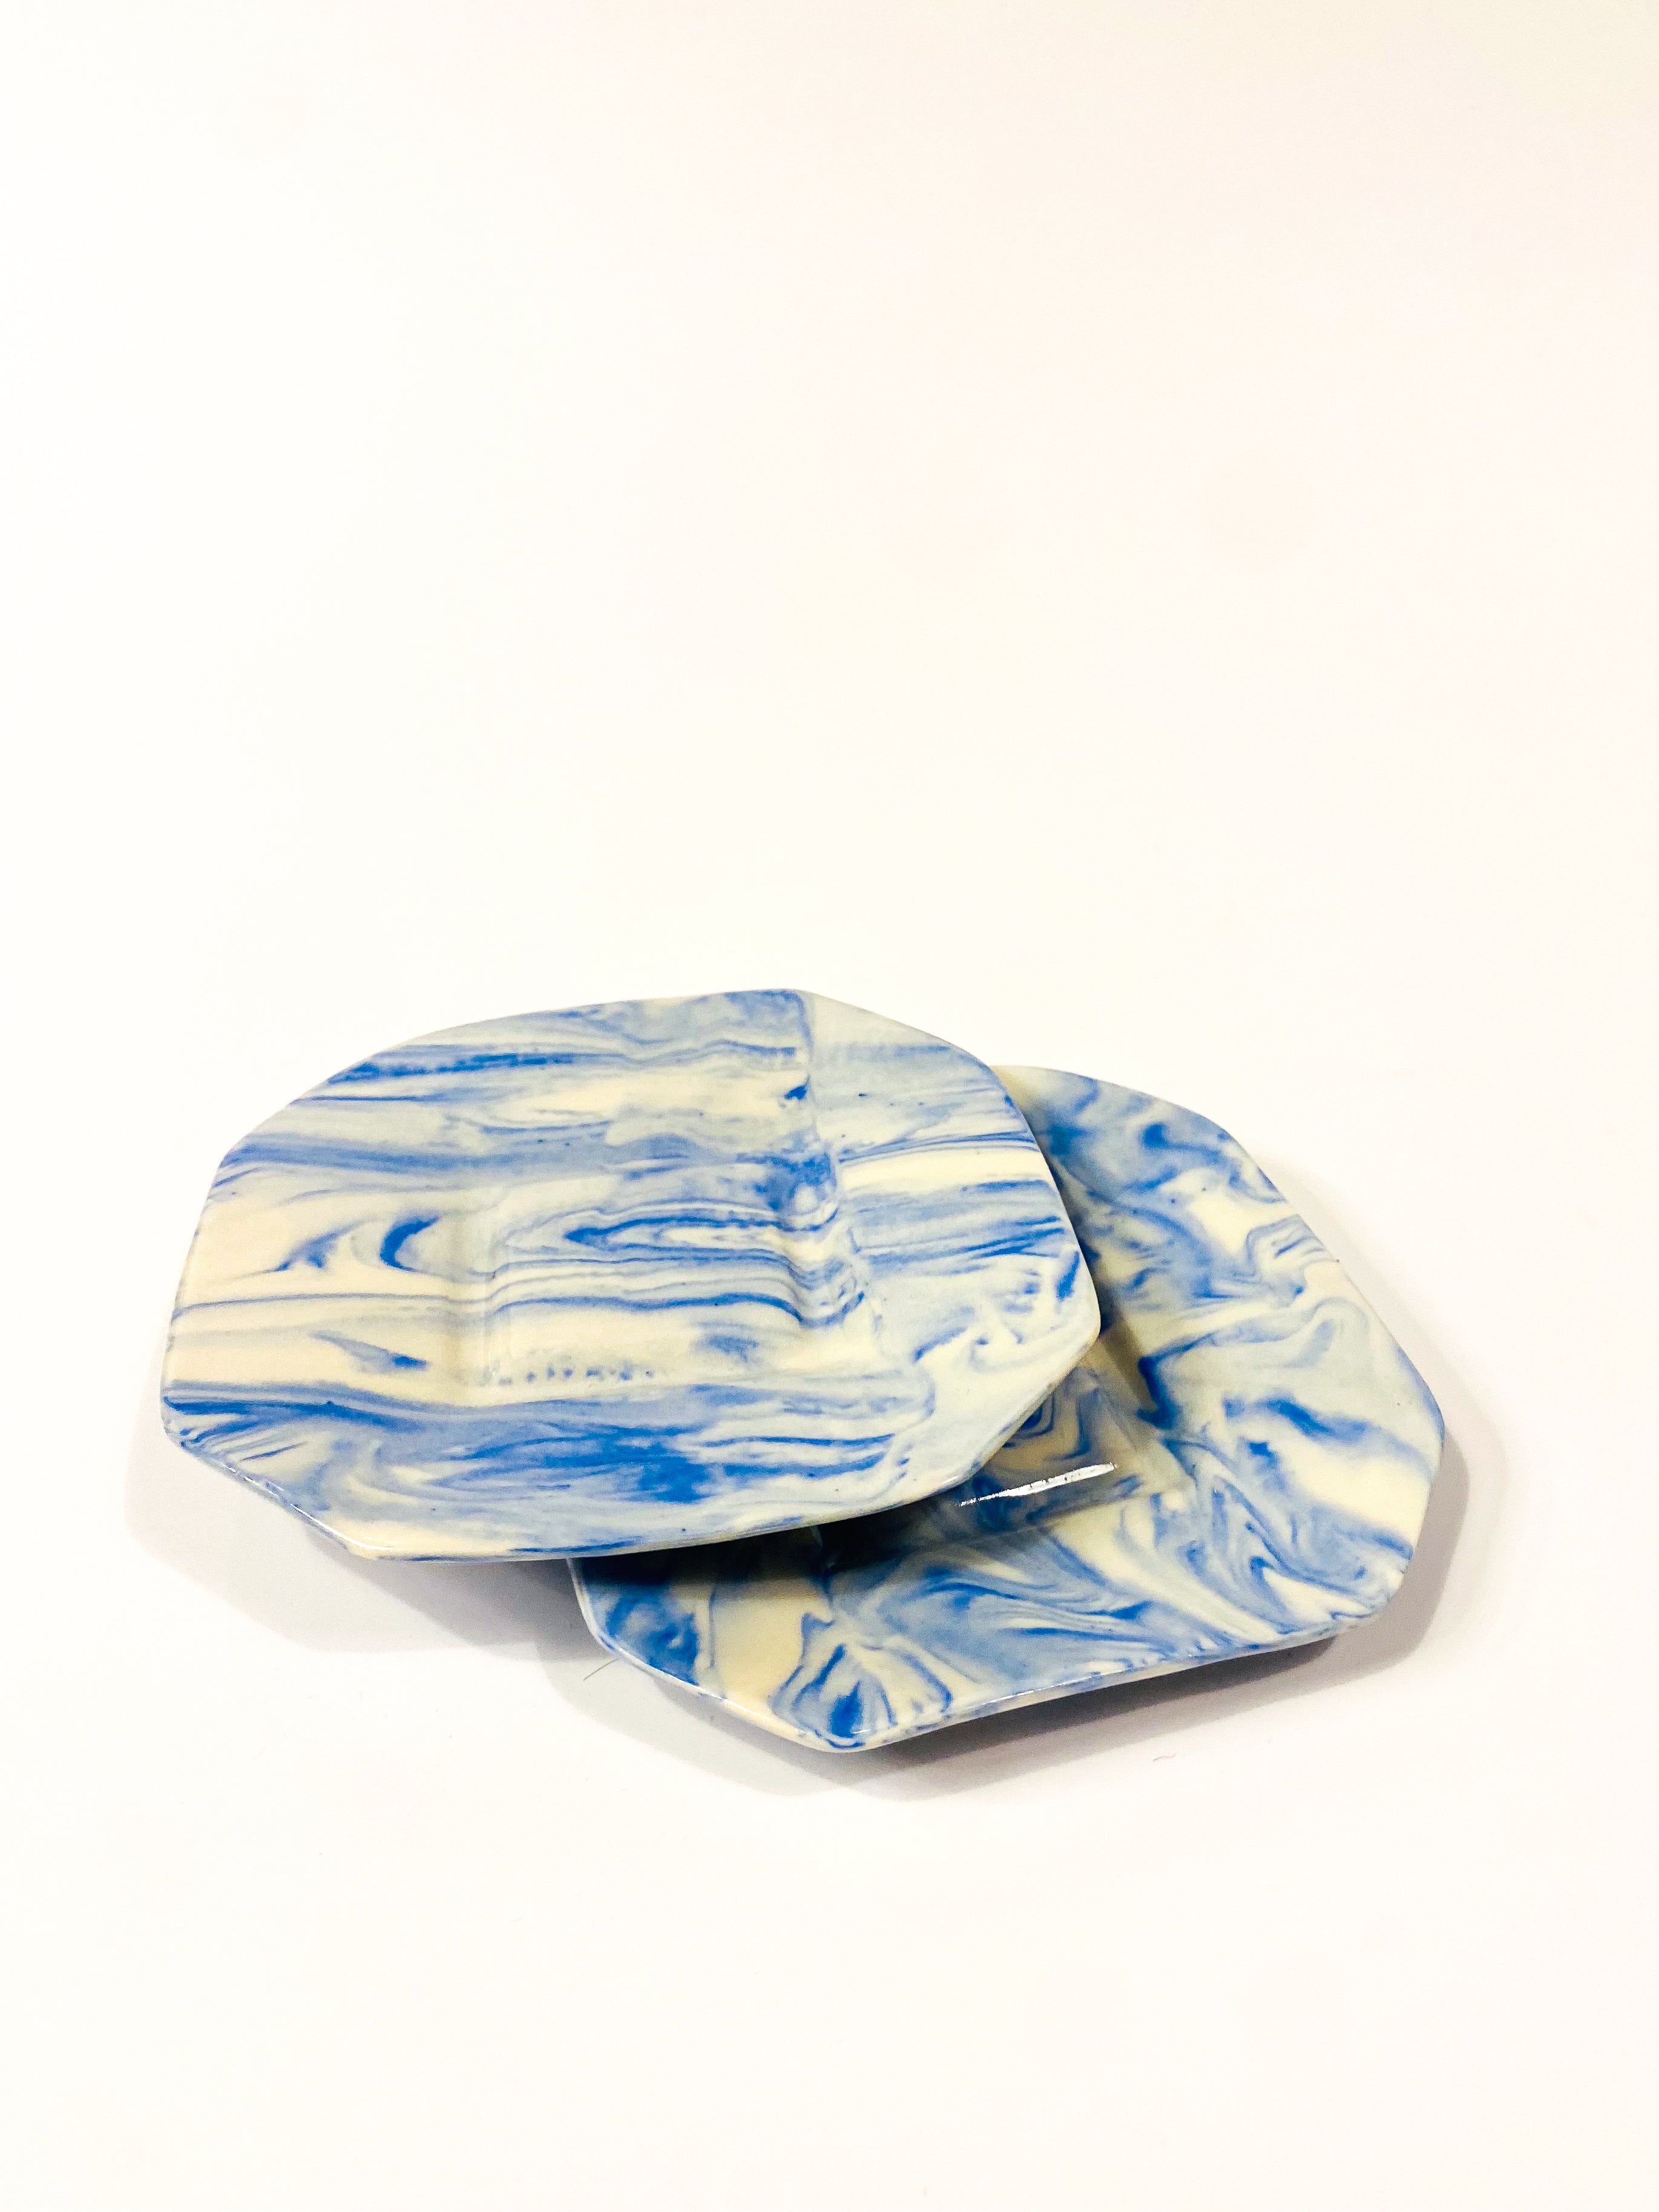 Isabel Rower Marbled Small Octogonal Plate in Blue